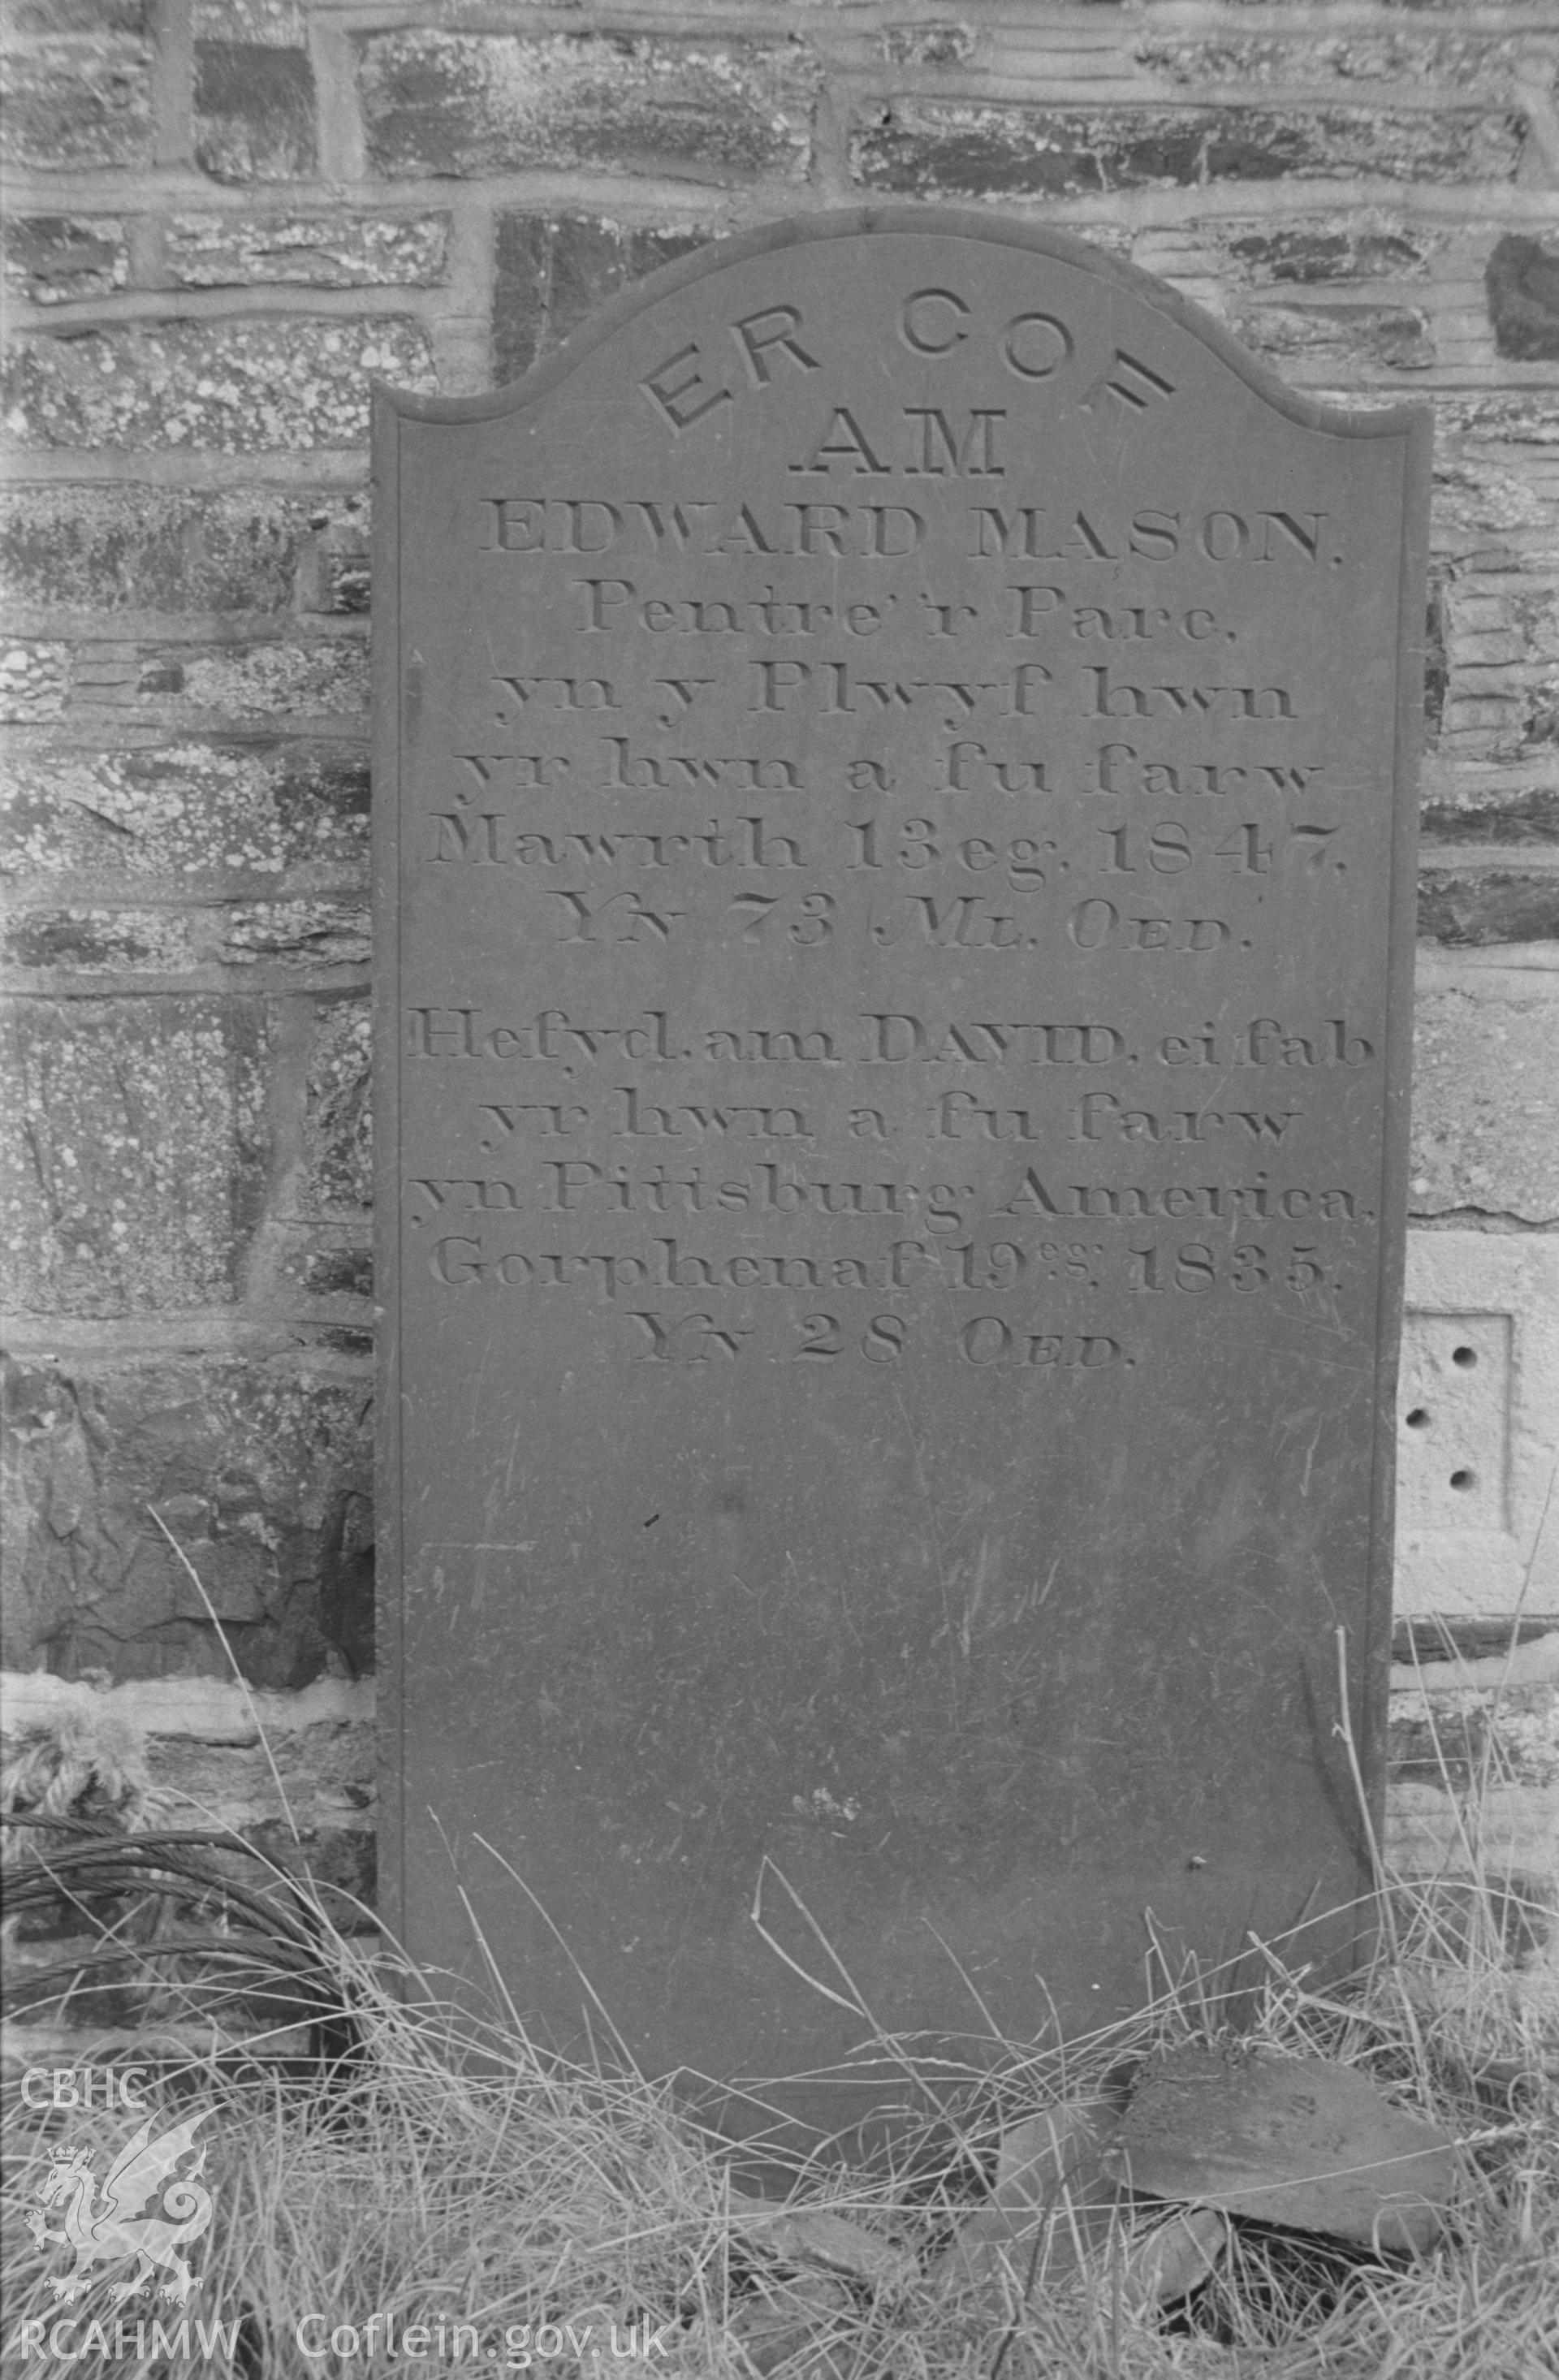 Digital copy of a black and white negative showing 1847 gravestone at St. Non's church, Llanerchaeron, in memory of Edward Mason, and his son David who died in Pittsburg, America, in 1835. Photographed by Arthur O. Chater in September 1966.